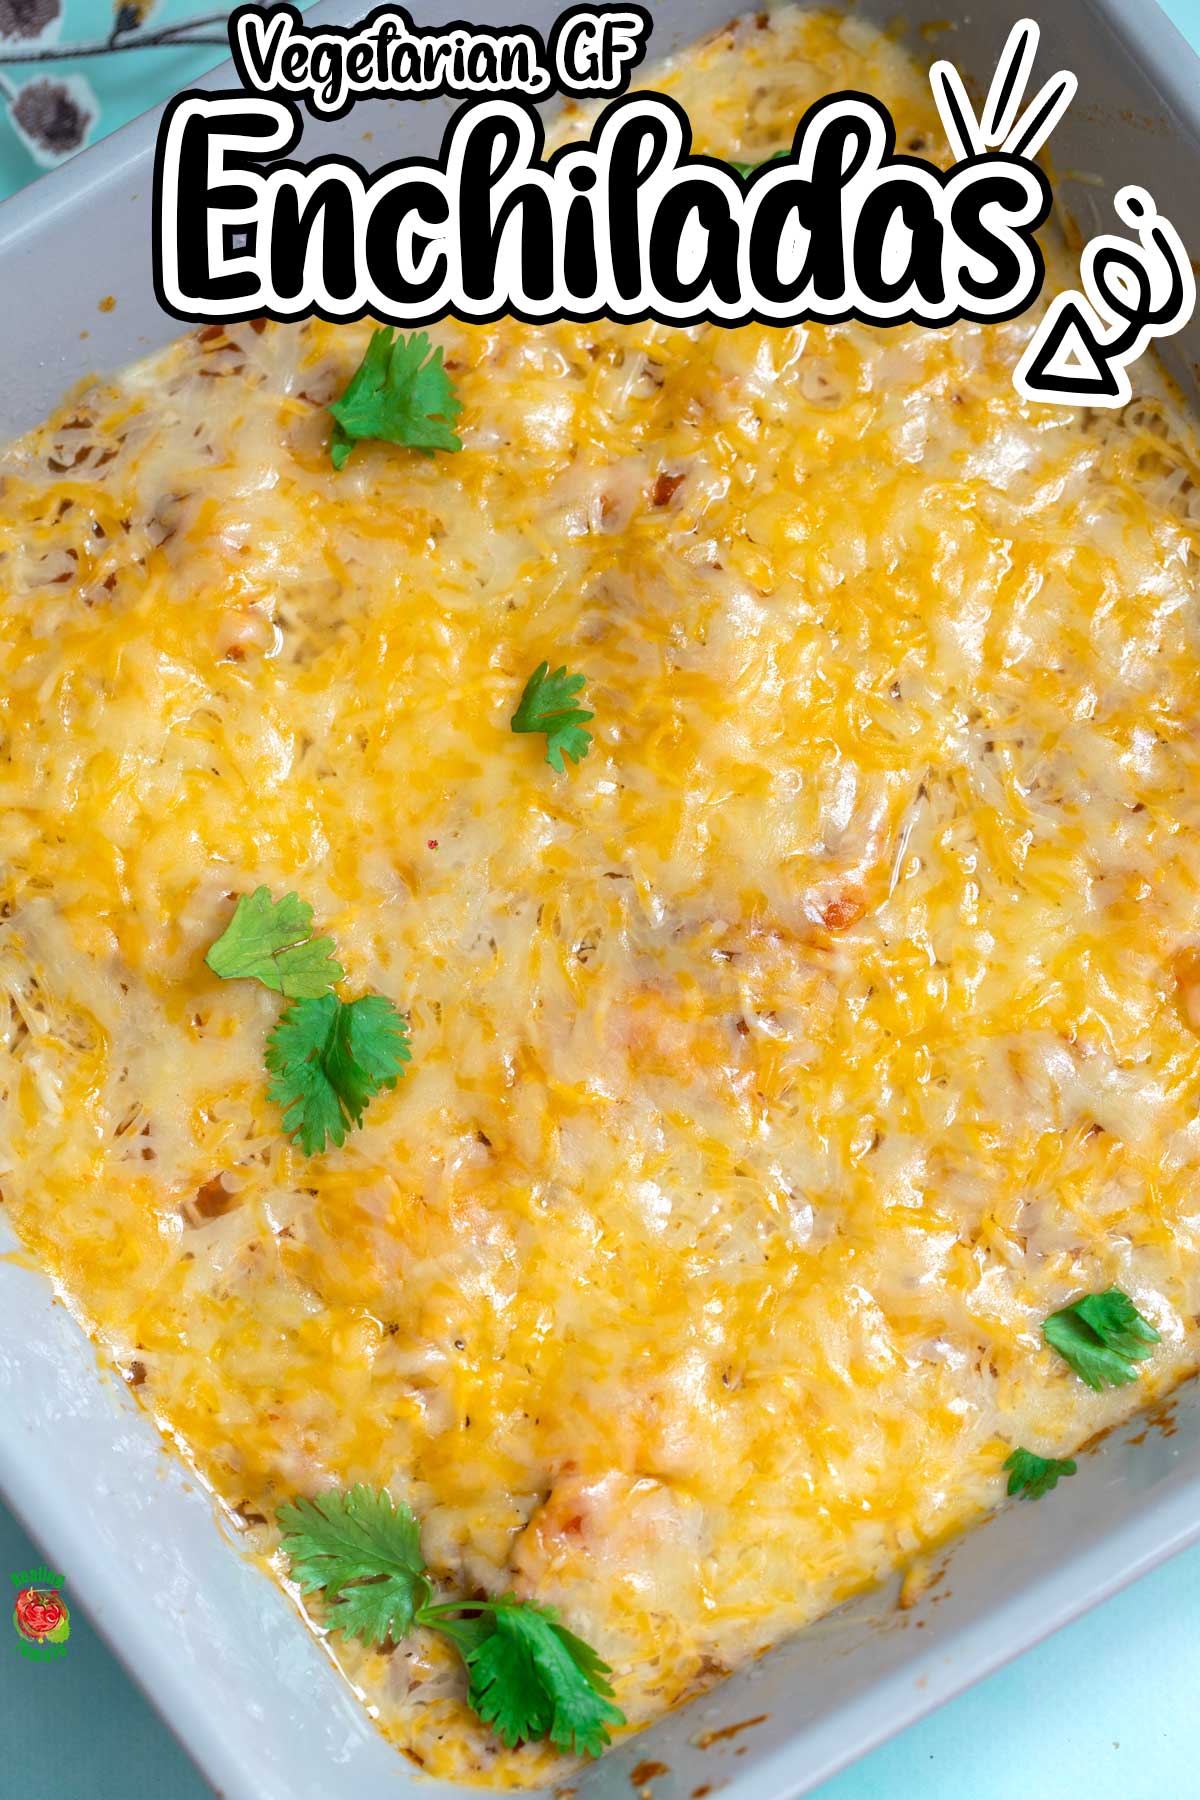 Top and closeup view of grey baking dish that has melted cheese and cilantro garnish. Filled with vegetarian enchiladas recipe